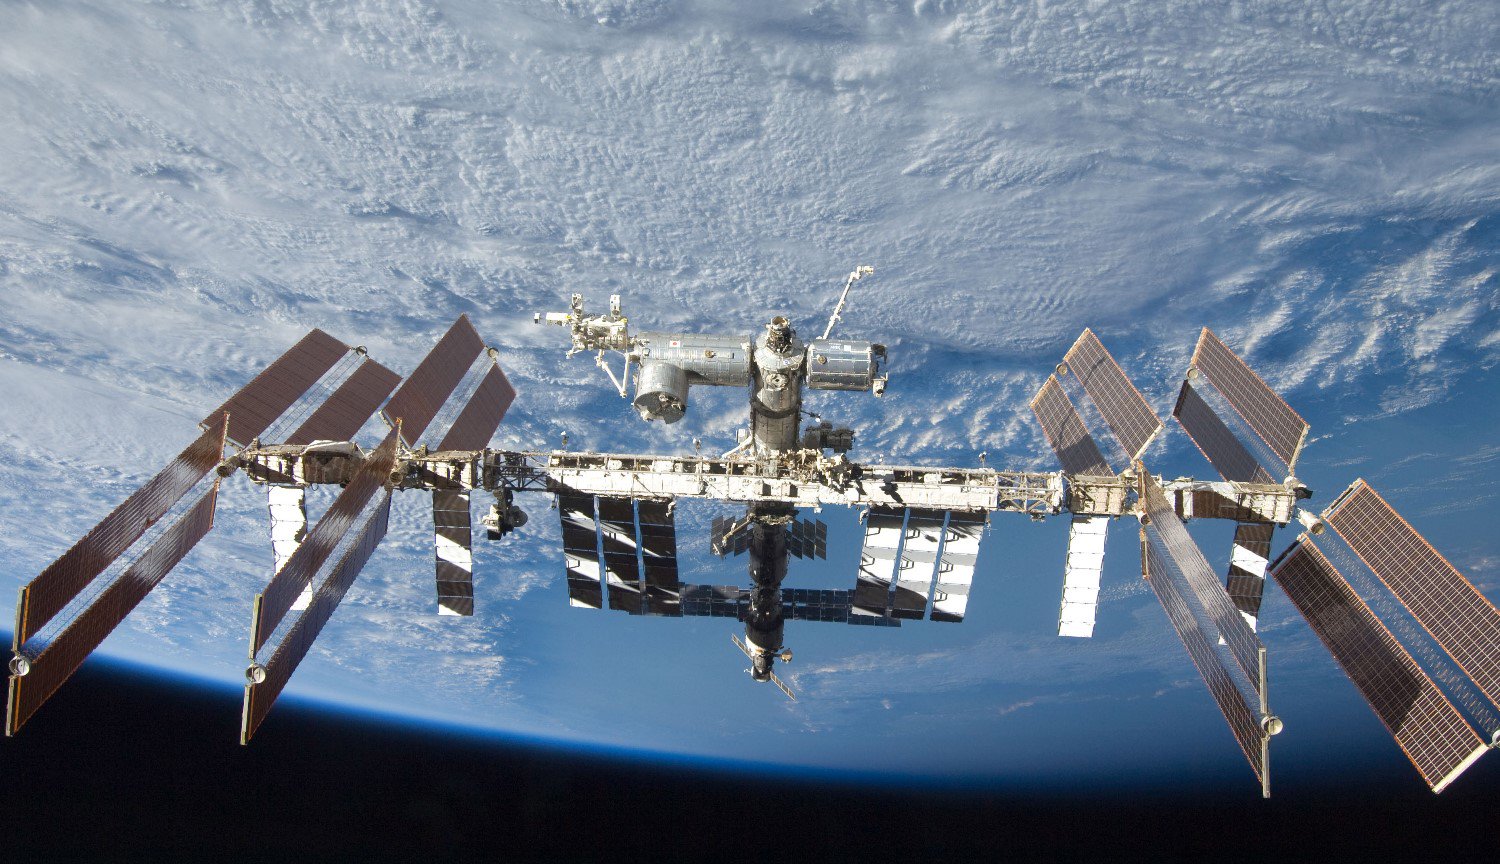 The new coating has protected ISS from superbugs